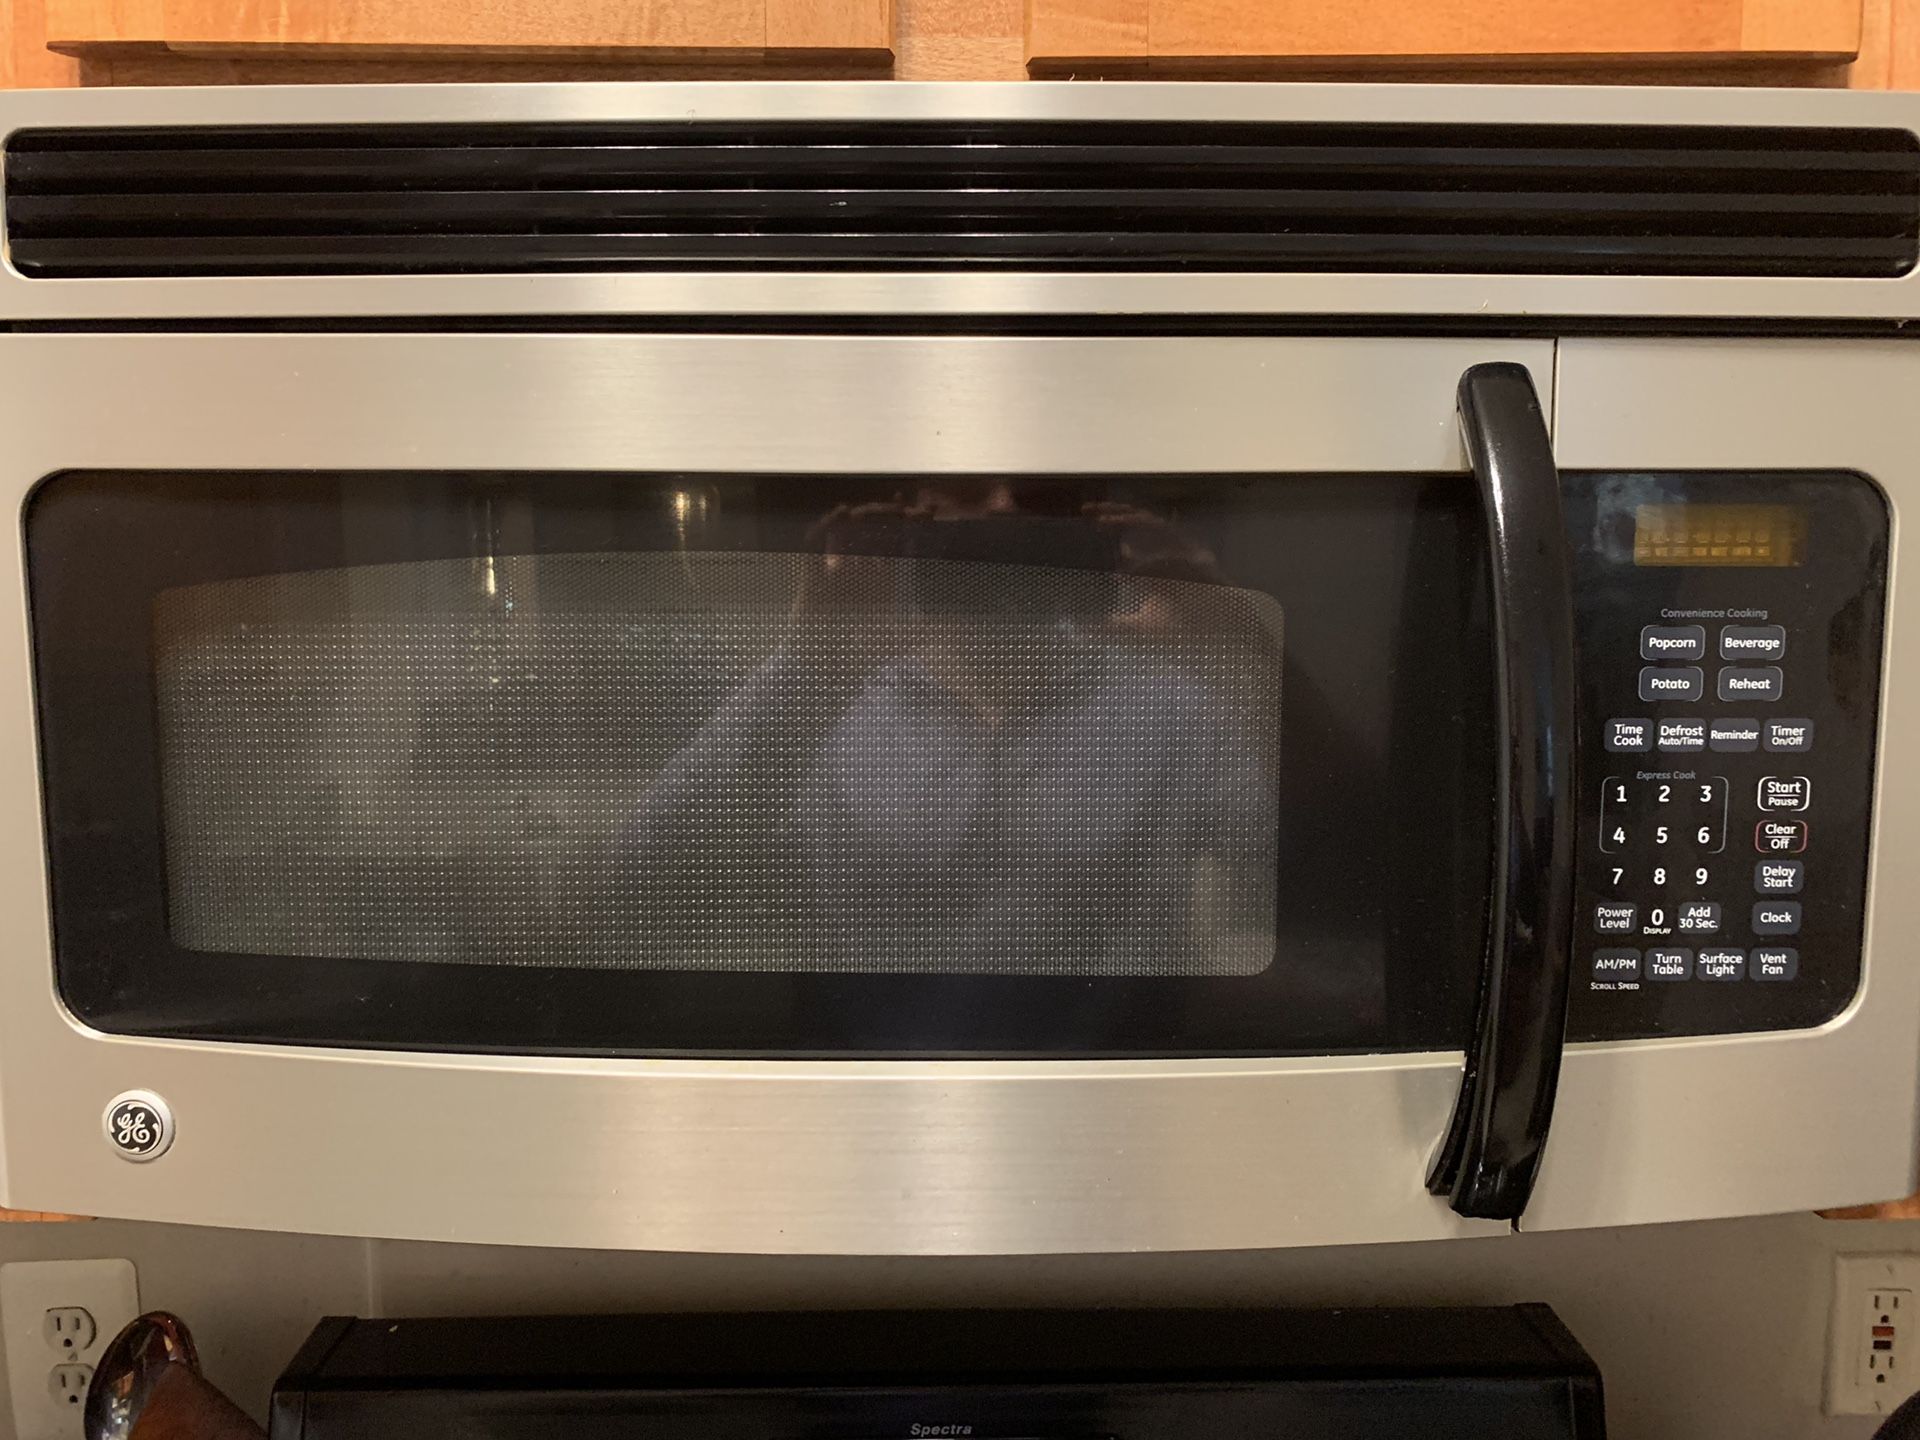 FOR SALE: General Electric Over the Range Microwave